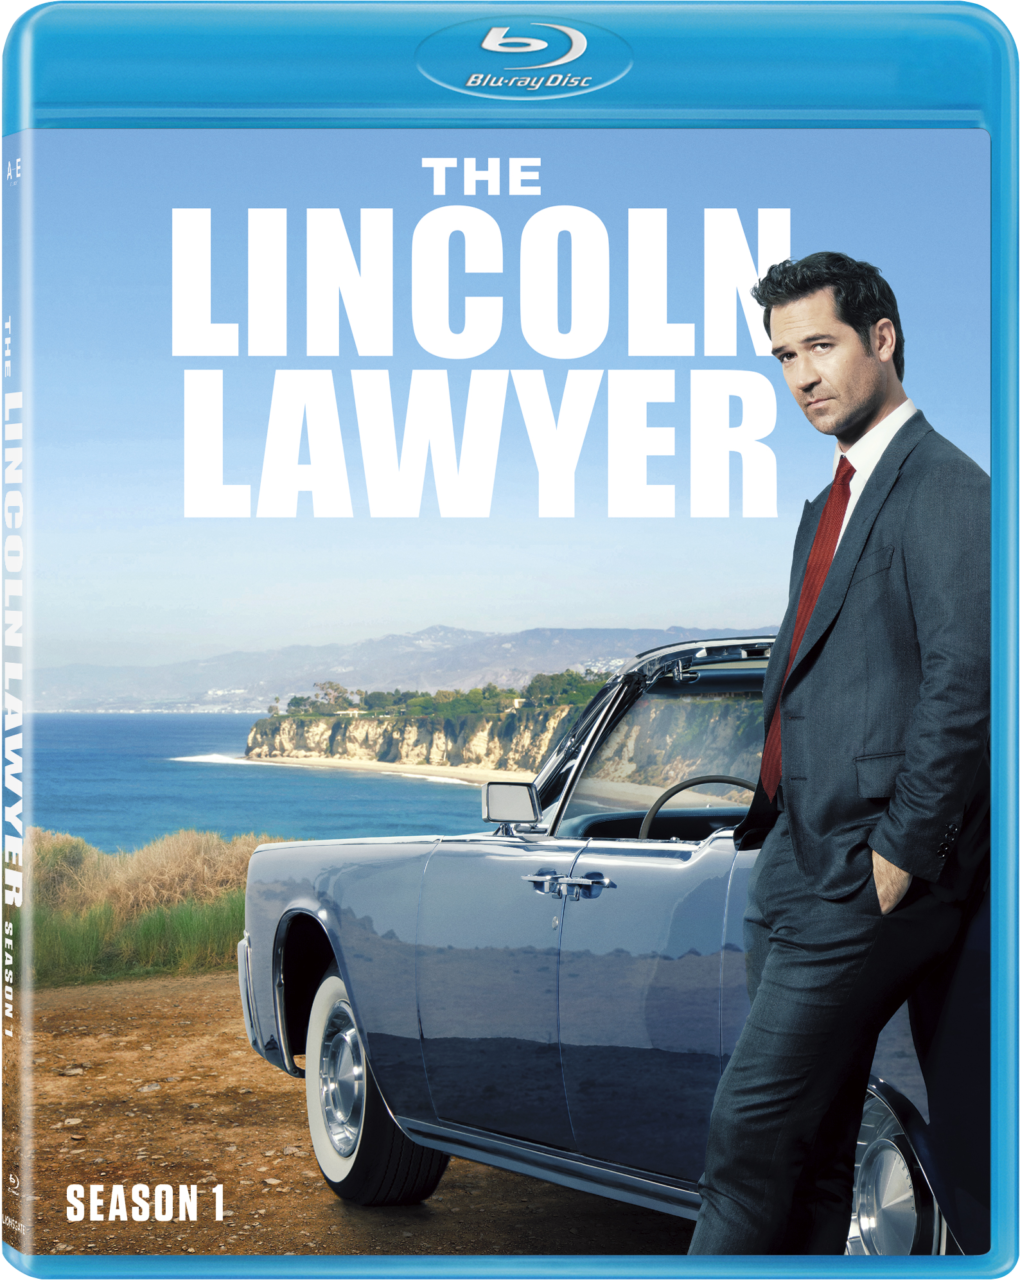 The Lincoln Lawyer Home Blu-Ray cover (Lionsgate)